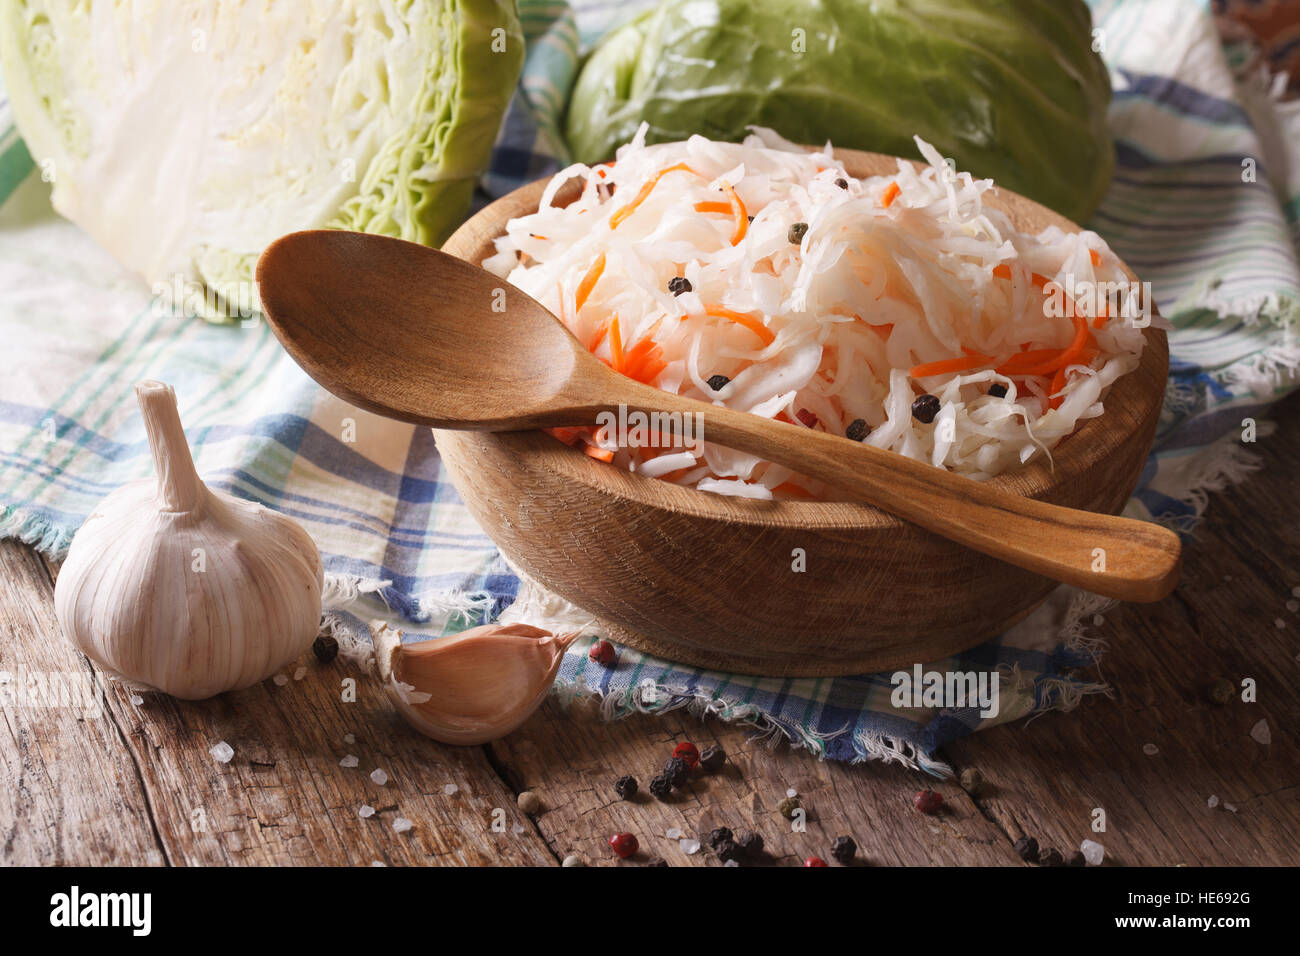 sauerkraut and carrots in a wooden plate closeup and ingredients. horizontal, rustic Stock Photo